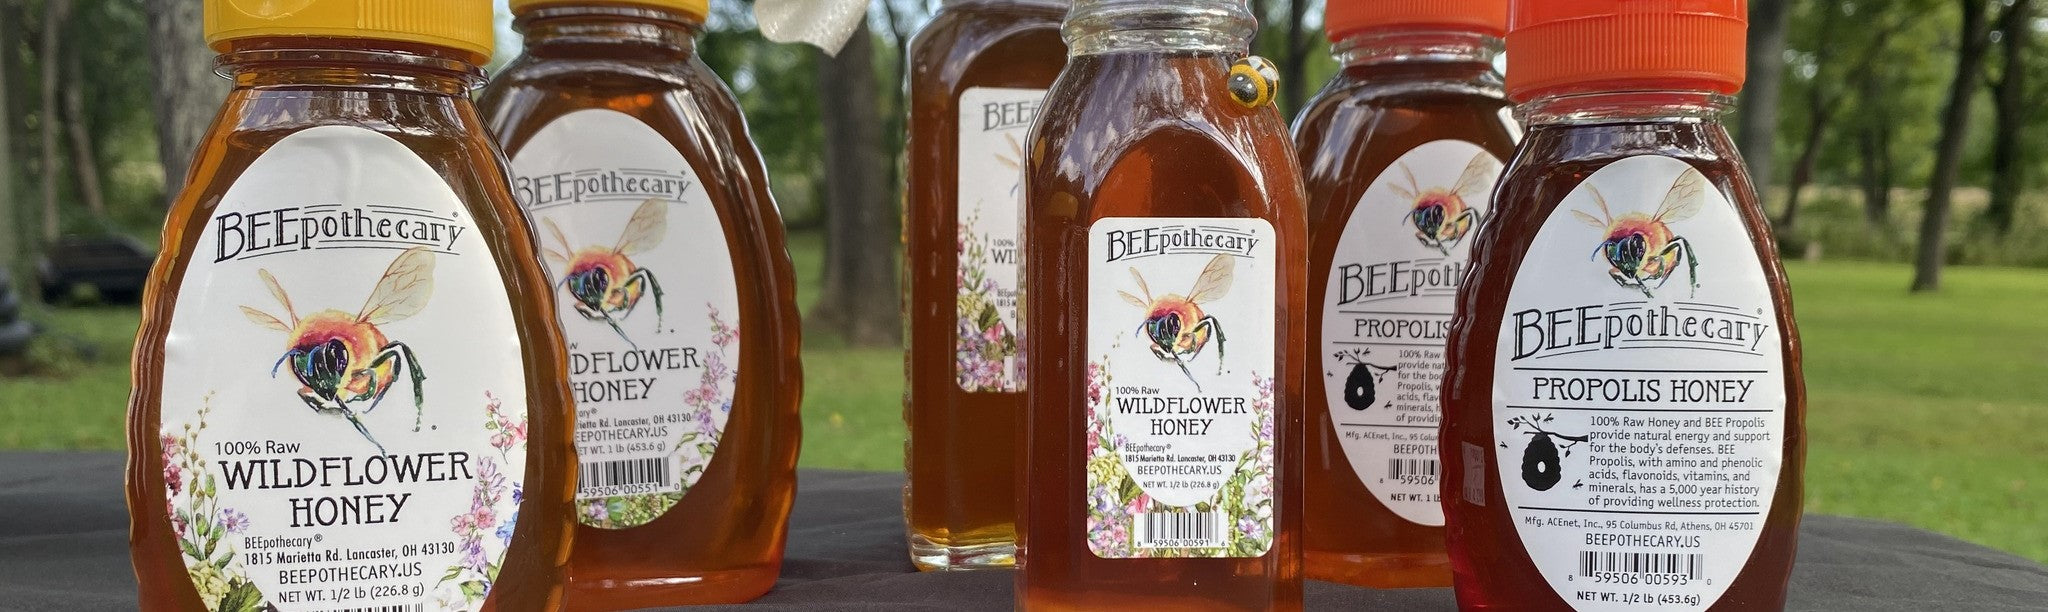 Wildflower Honey Products for Sale